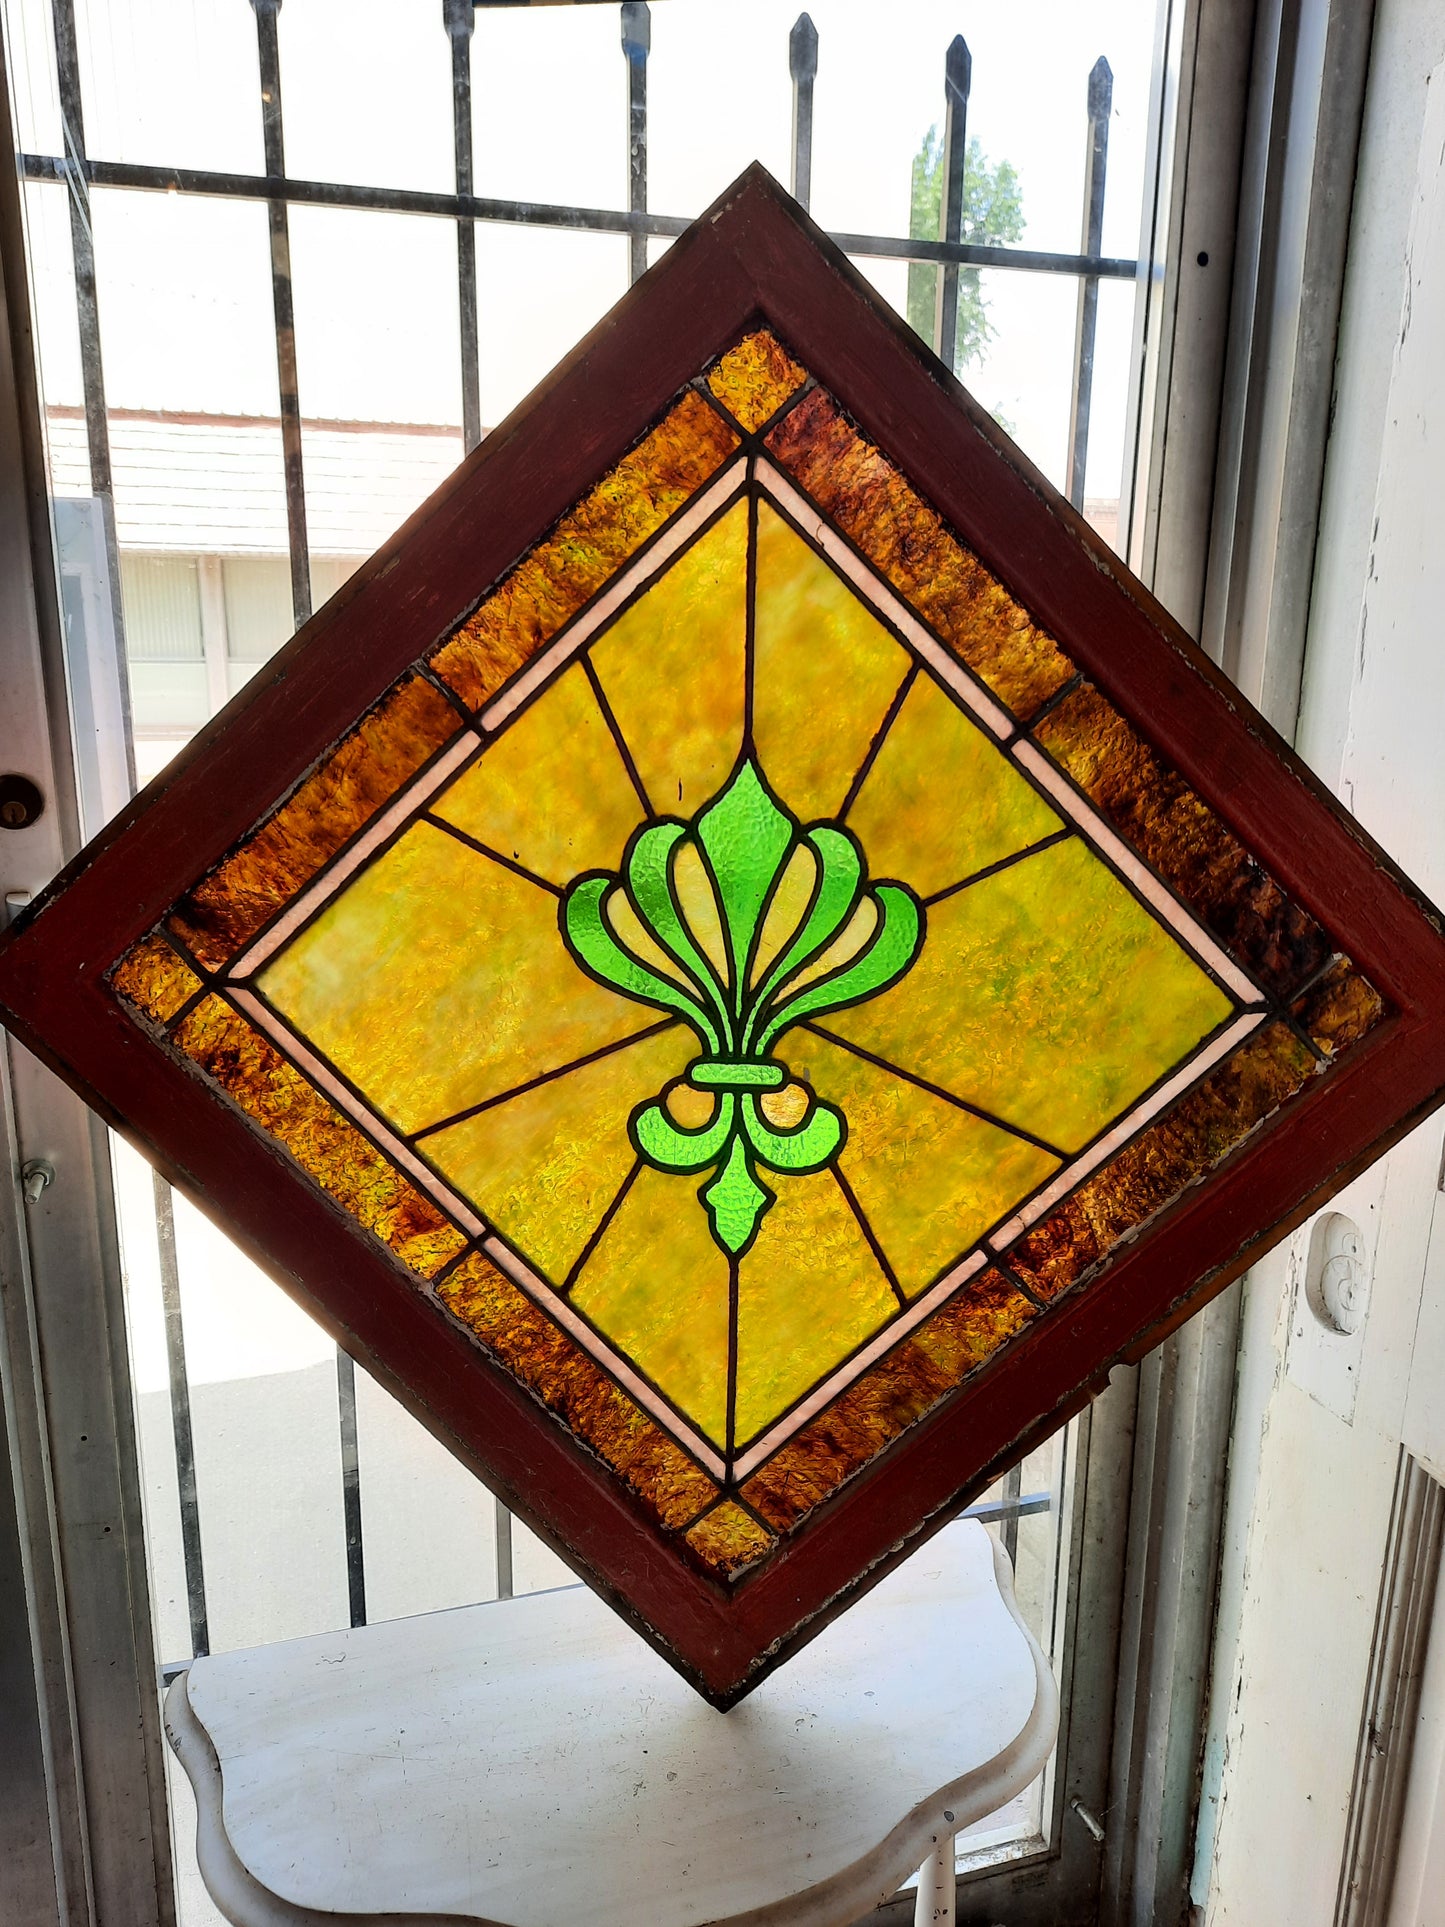 Antique Fleur de Lis Diamond Stained Glass Window, Green Brown Yellow Stained Glass